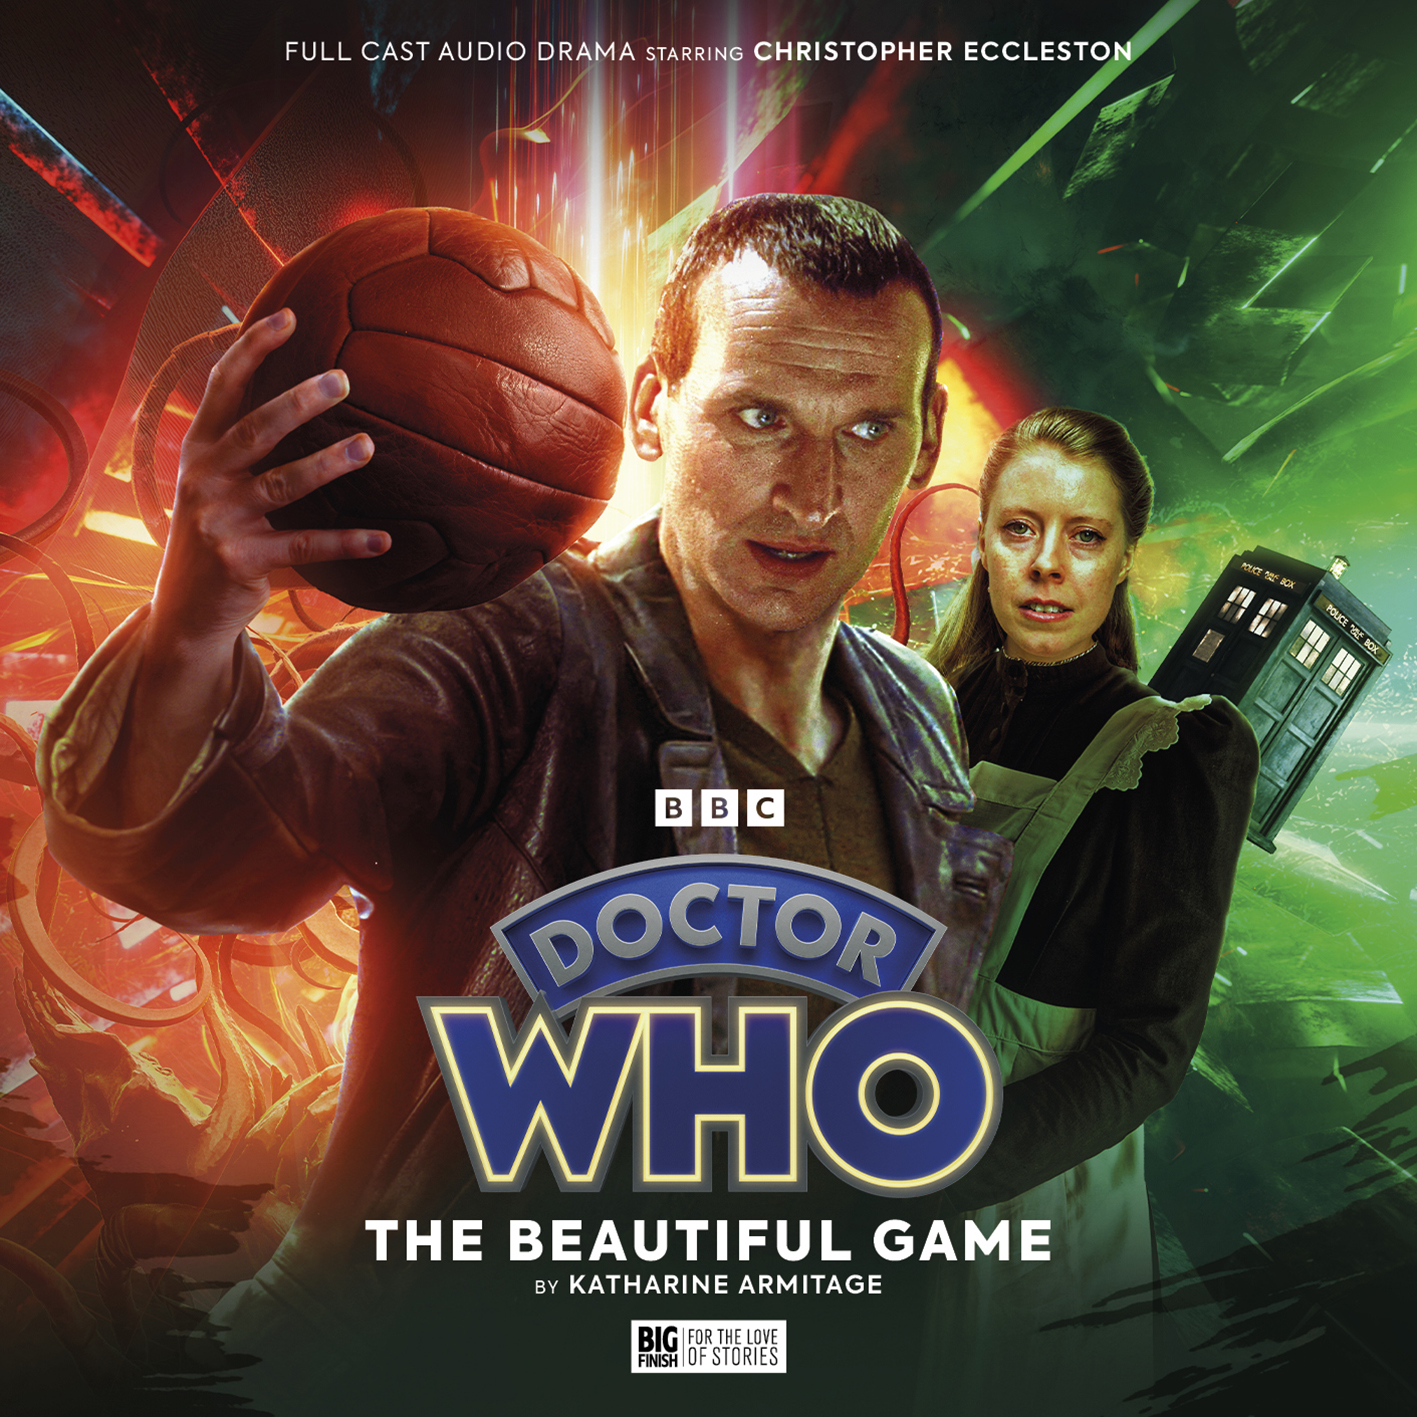 AUDIO: The Beautiful Game [+]Loading...["The Beautiful Game (audio story)"]